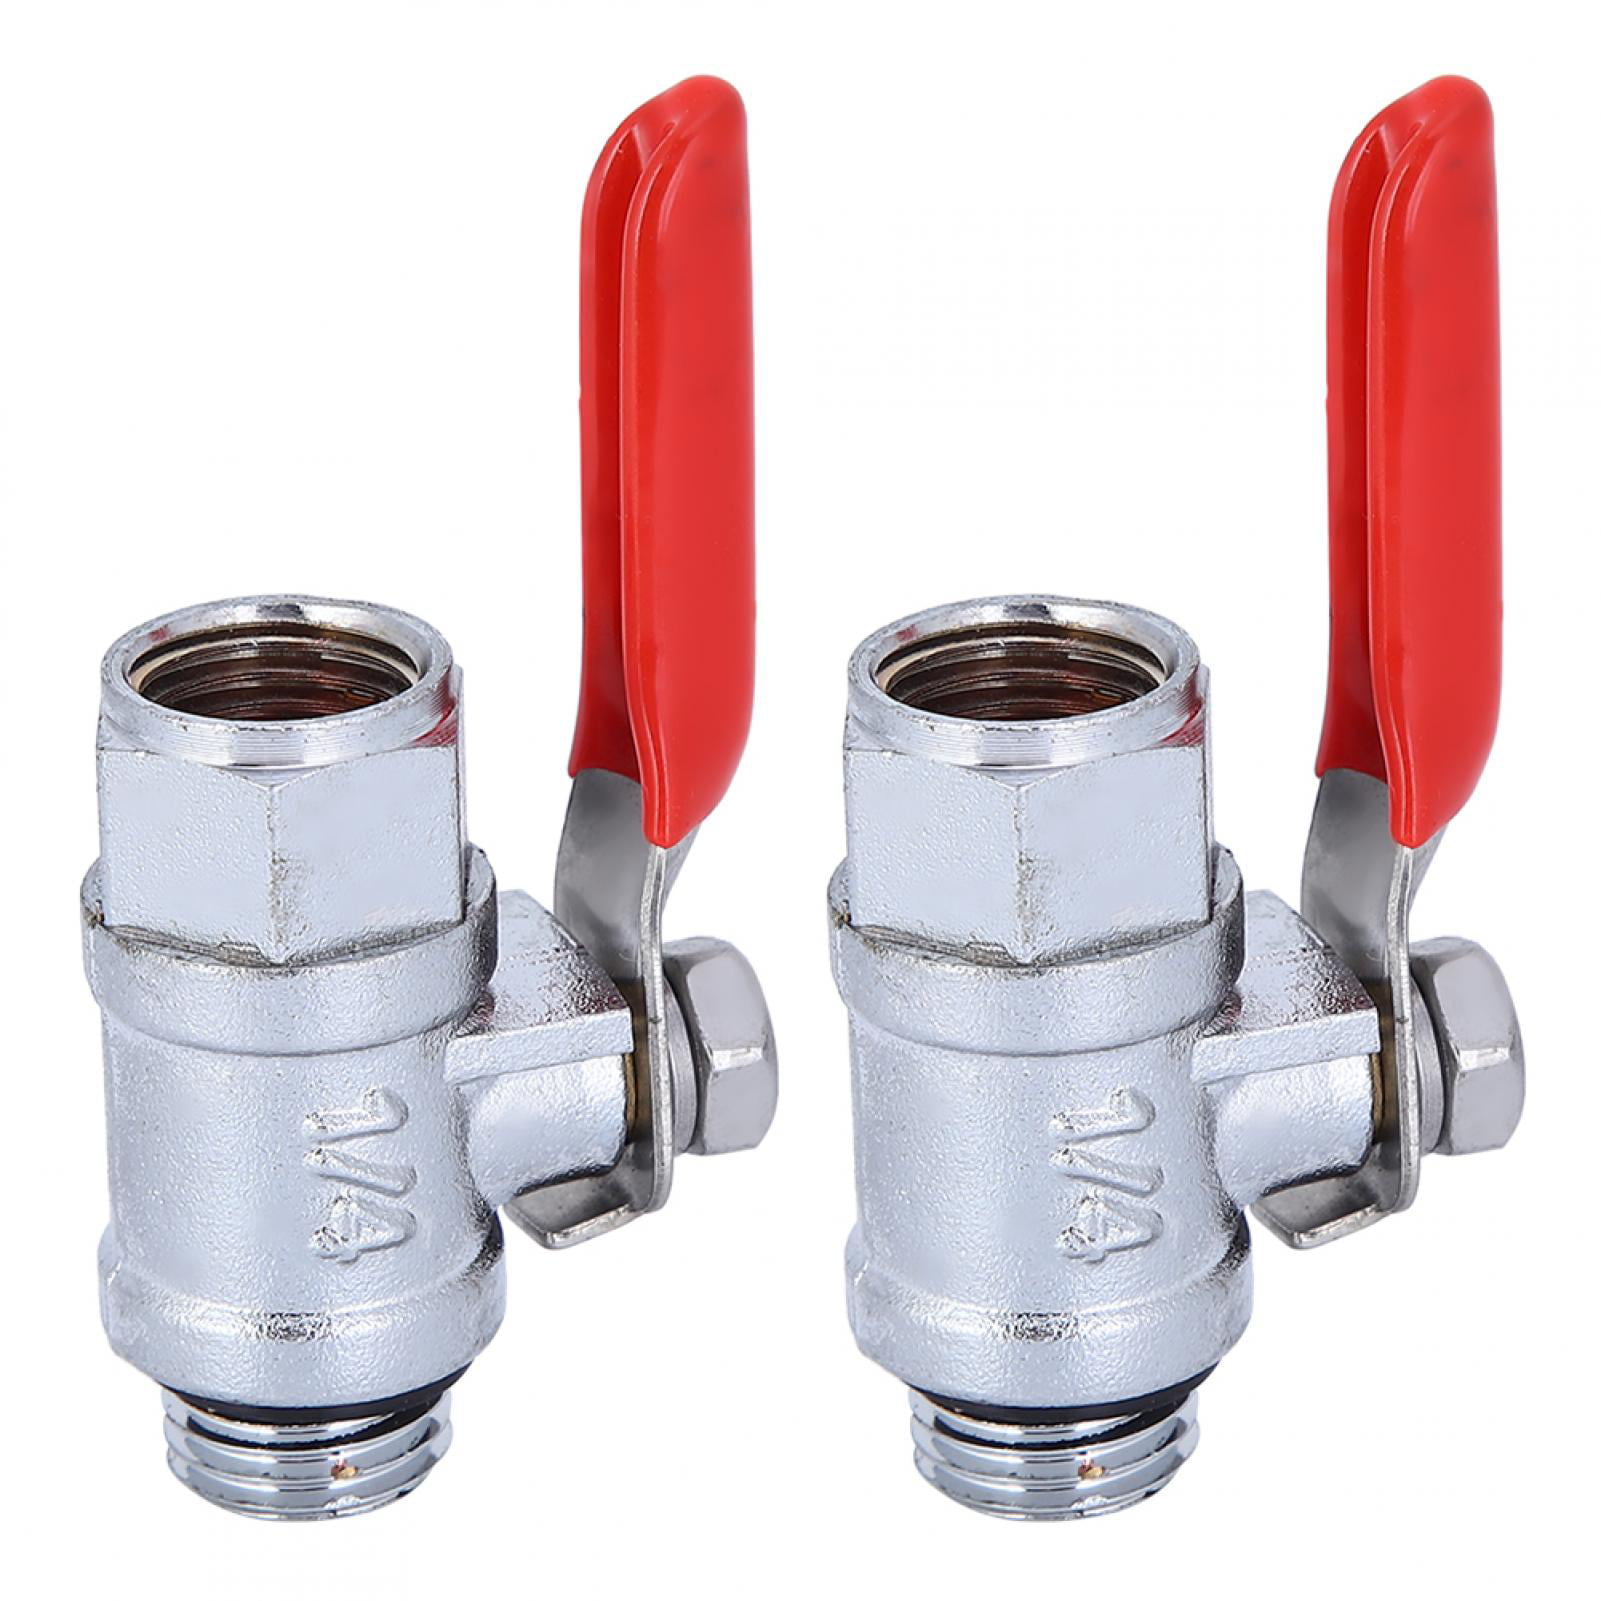 Low Magnetic Permitivity for Irrigation System/Piping System Cyclic Heating/Drinking Water Distribution Steel Ball Valve 2pcs Ball Valve Switch